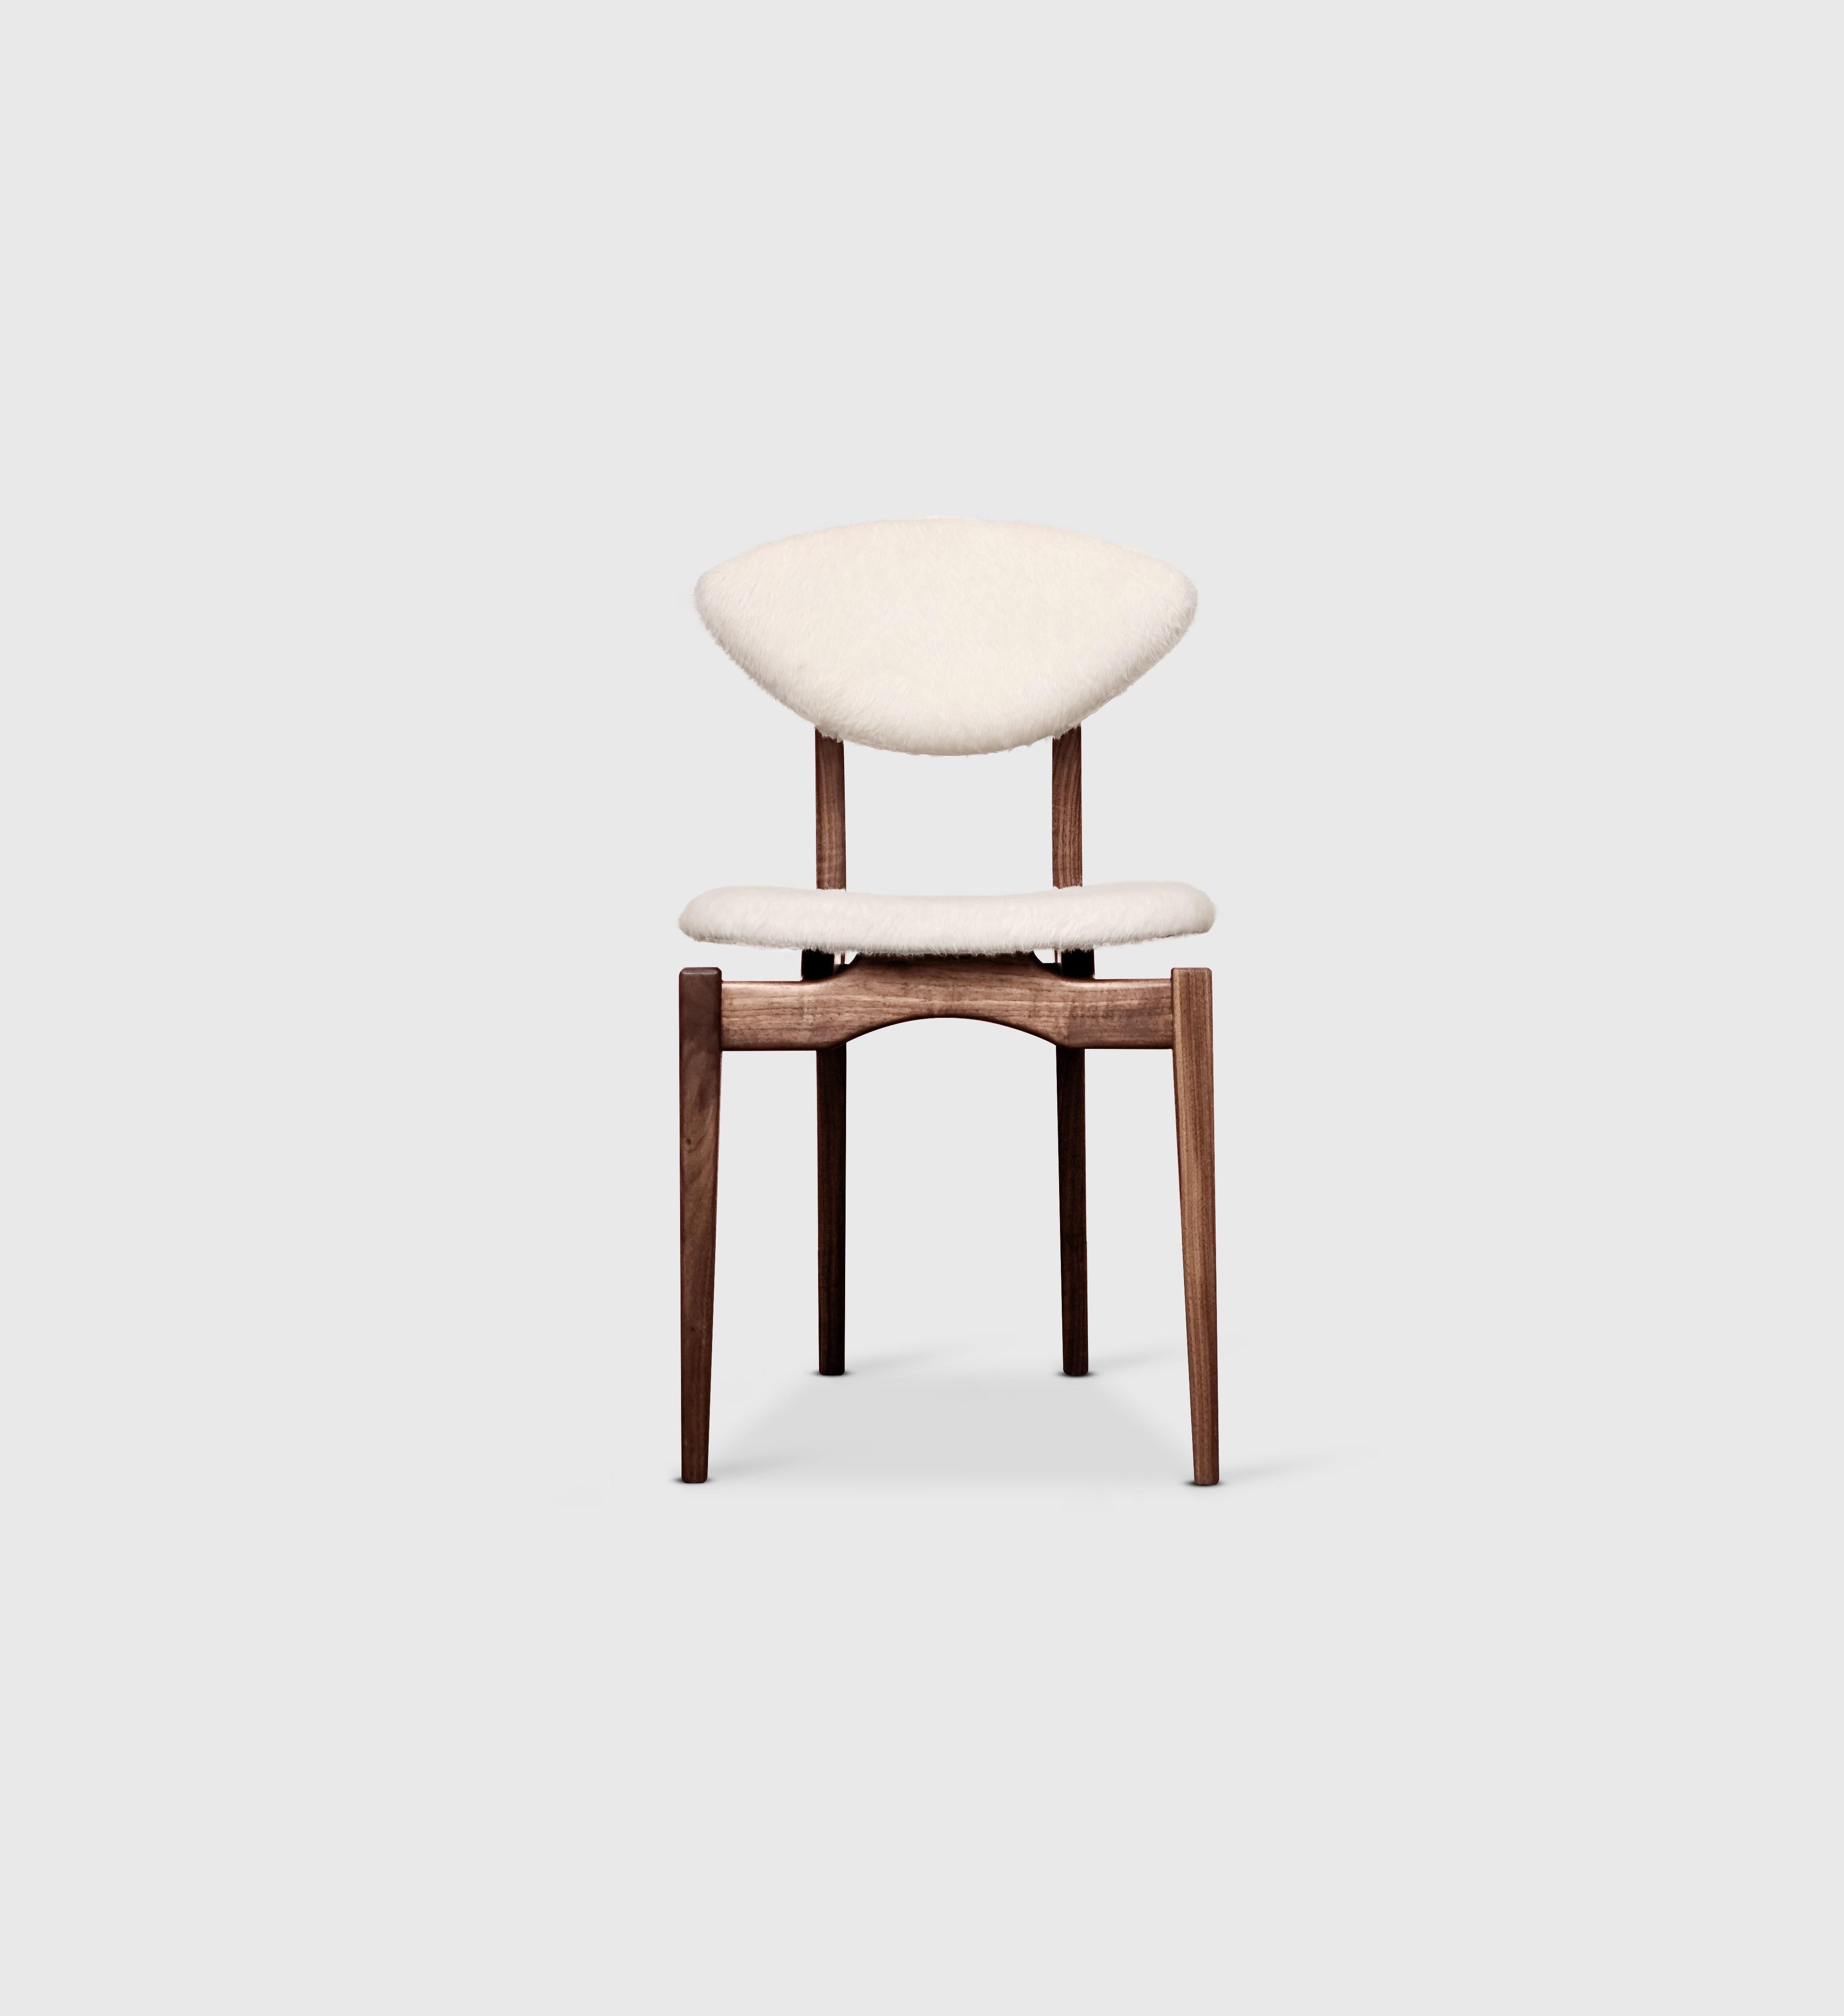 White Femur dining chair by Atra Design
Dimensions: D 58.5 x W 45 x H 85 cm
Materials: Sandra Jordan Alpaca fabric, walnut.
Available in leather or fabric seat and in other colors.

Atra Design
We are Atra, a furniture brand produced by Atra form a